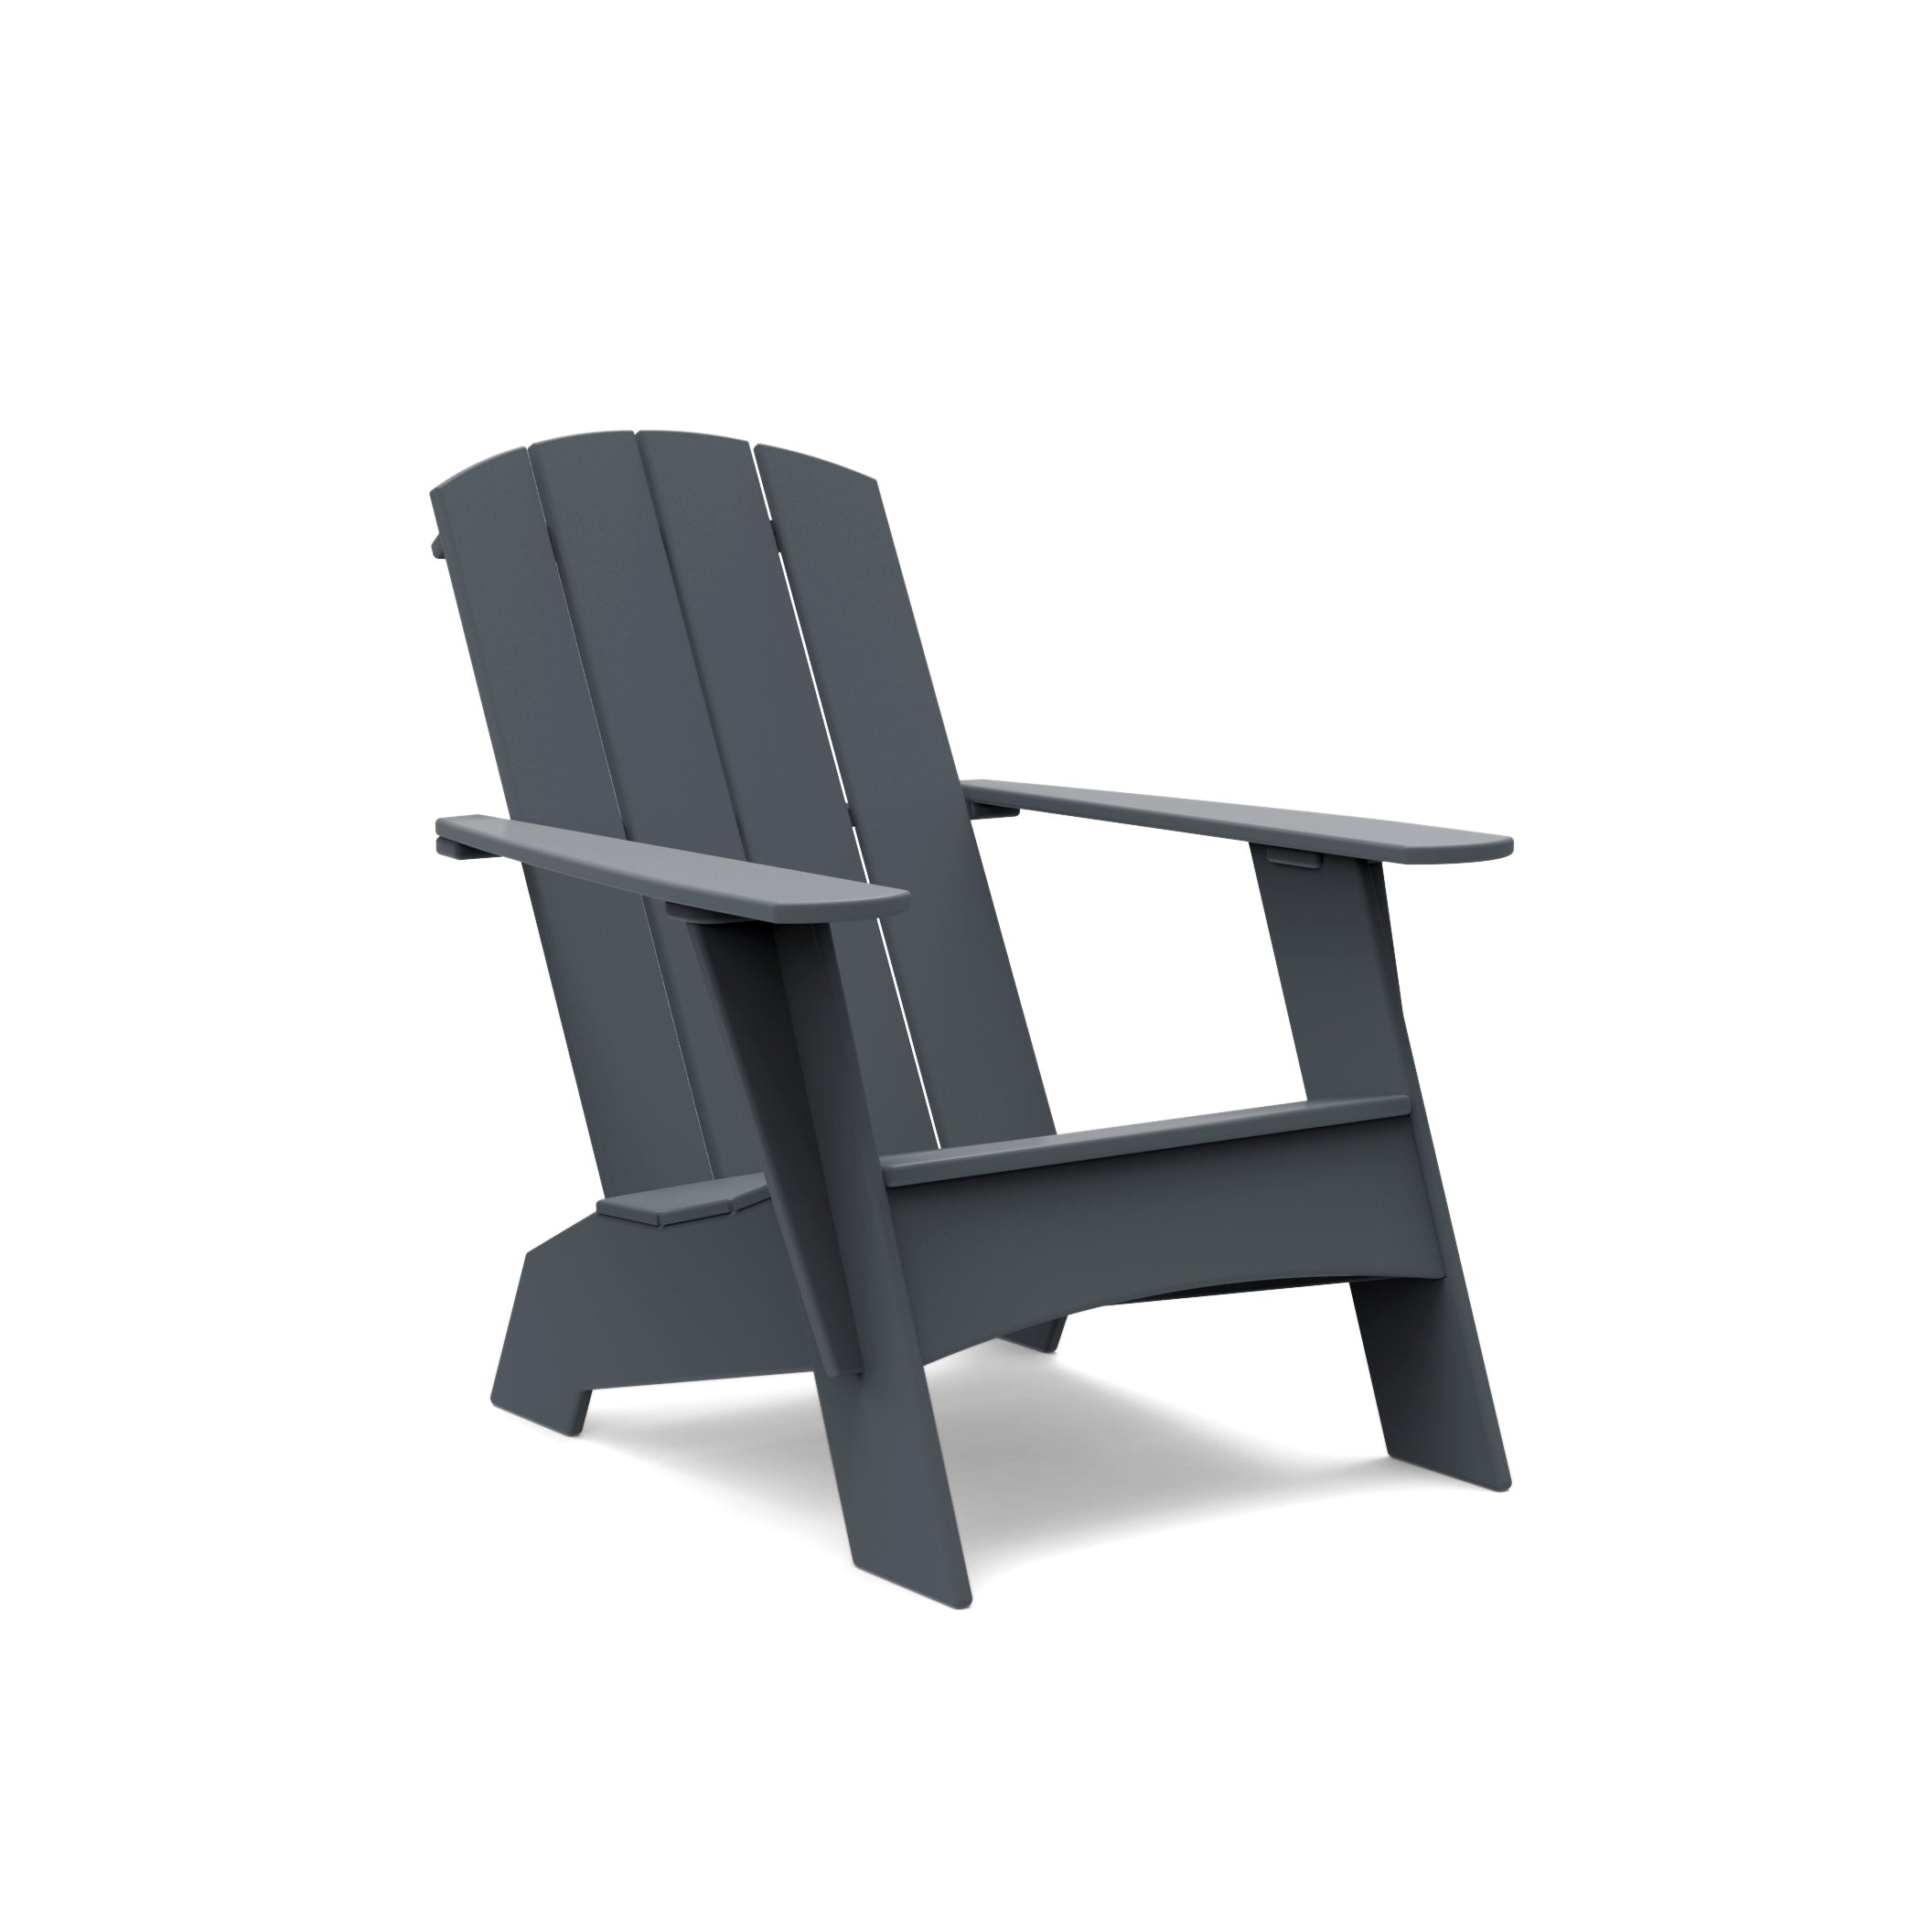 Curved Adirondack Chair and Satellite Bundle